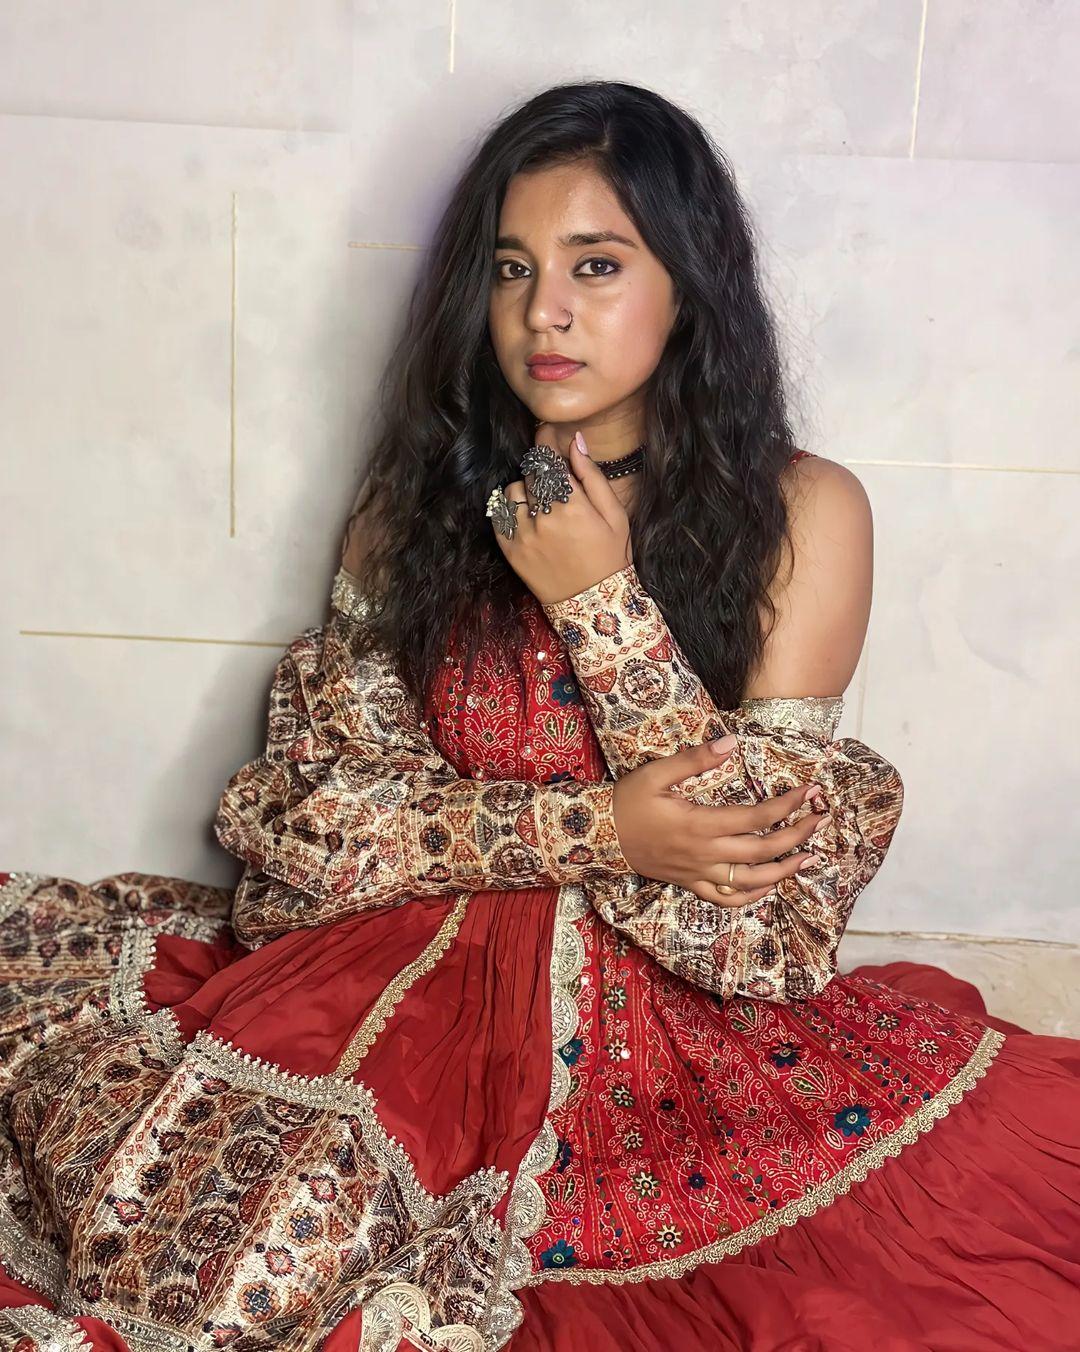 Sumbul Touqeer's ethnic fashion ticks all the right boxes. This lehenga is super adaptable, making it the perfect wear for any festive occasion and even weddings!